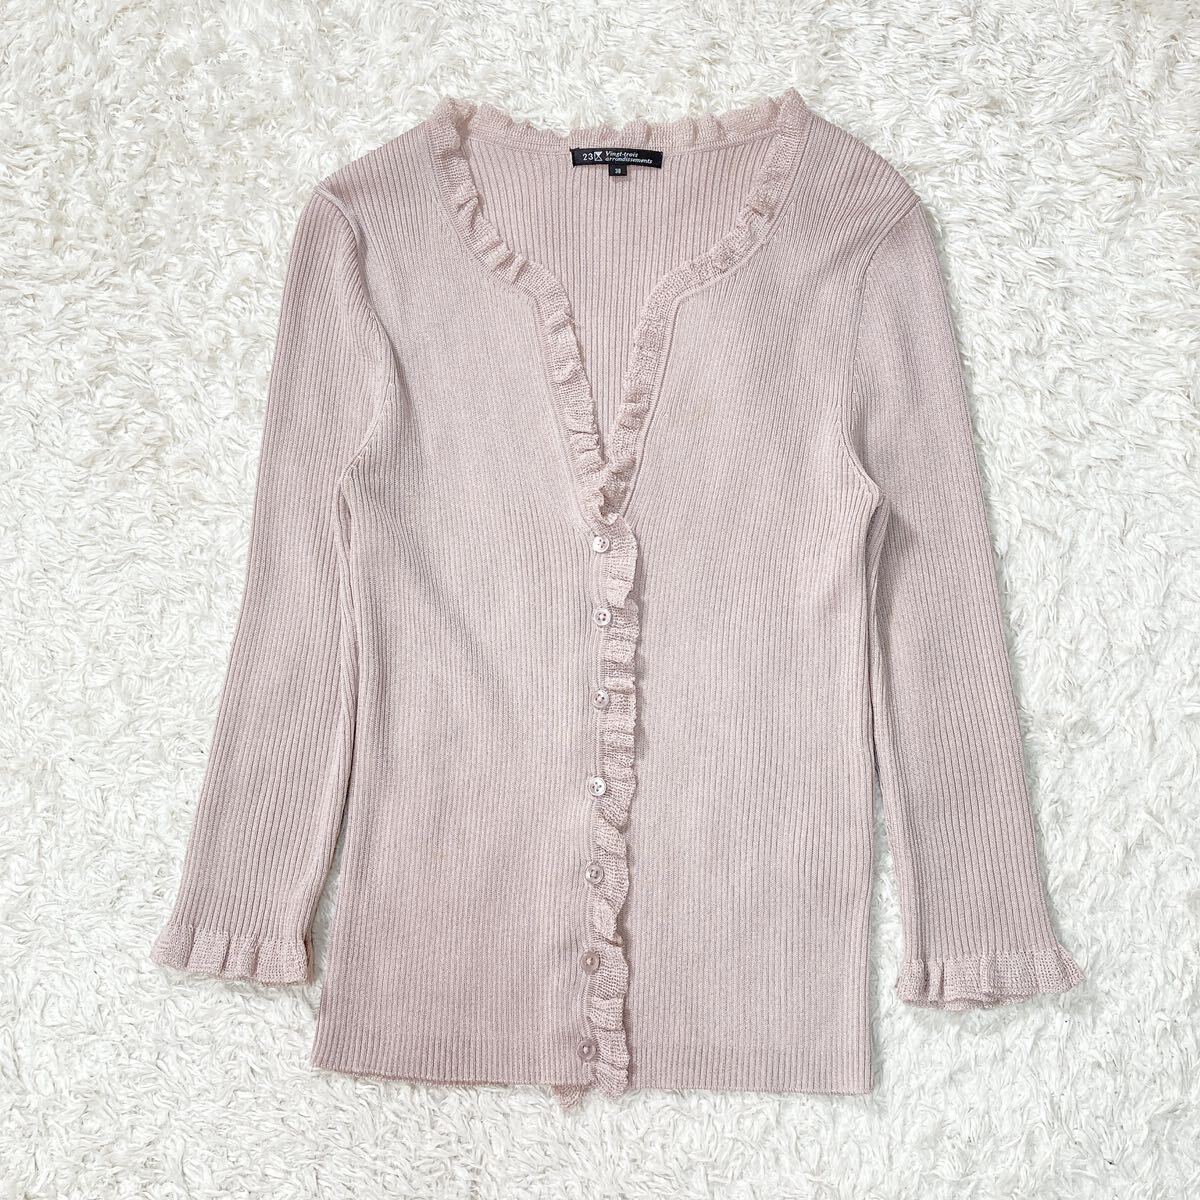 23 district ensemble knitted cardigan 38 M lady's sombreness pink B32431-90